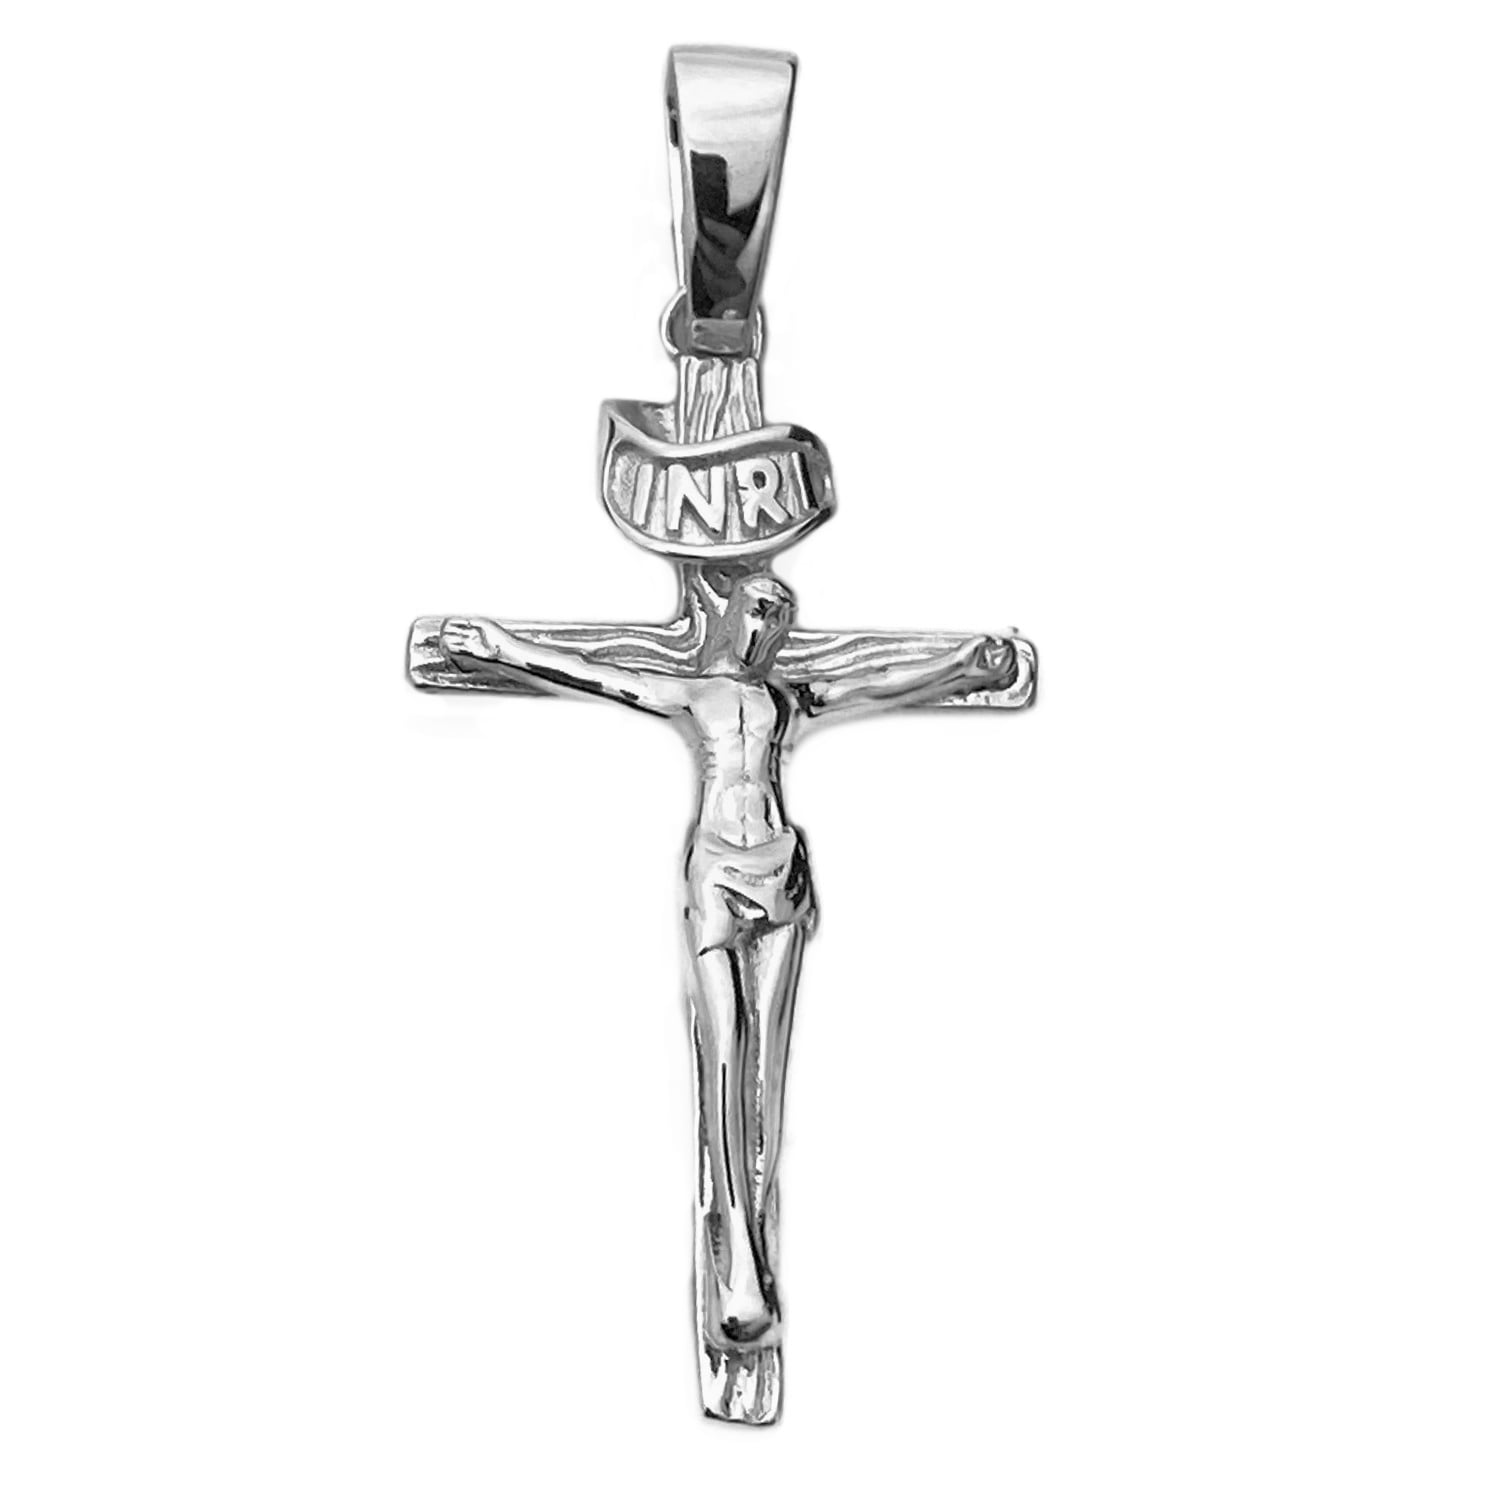 10pcs/lot Charms Cross Antique Silver Color Jesus Cross Pendant Charms Nail Cross  Charms For Jewelry Making - Price history & Review, AliExpress Seller -  Irelia Official Store